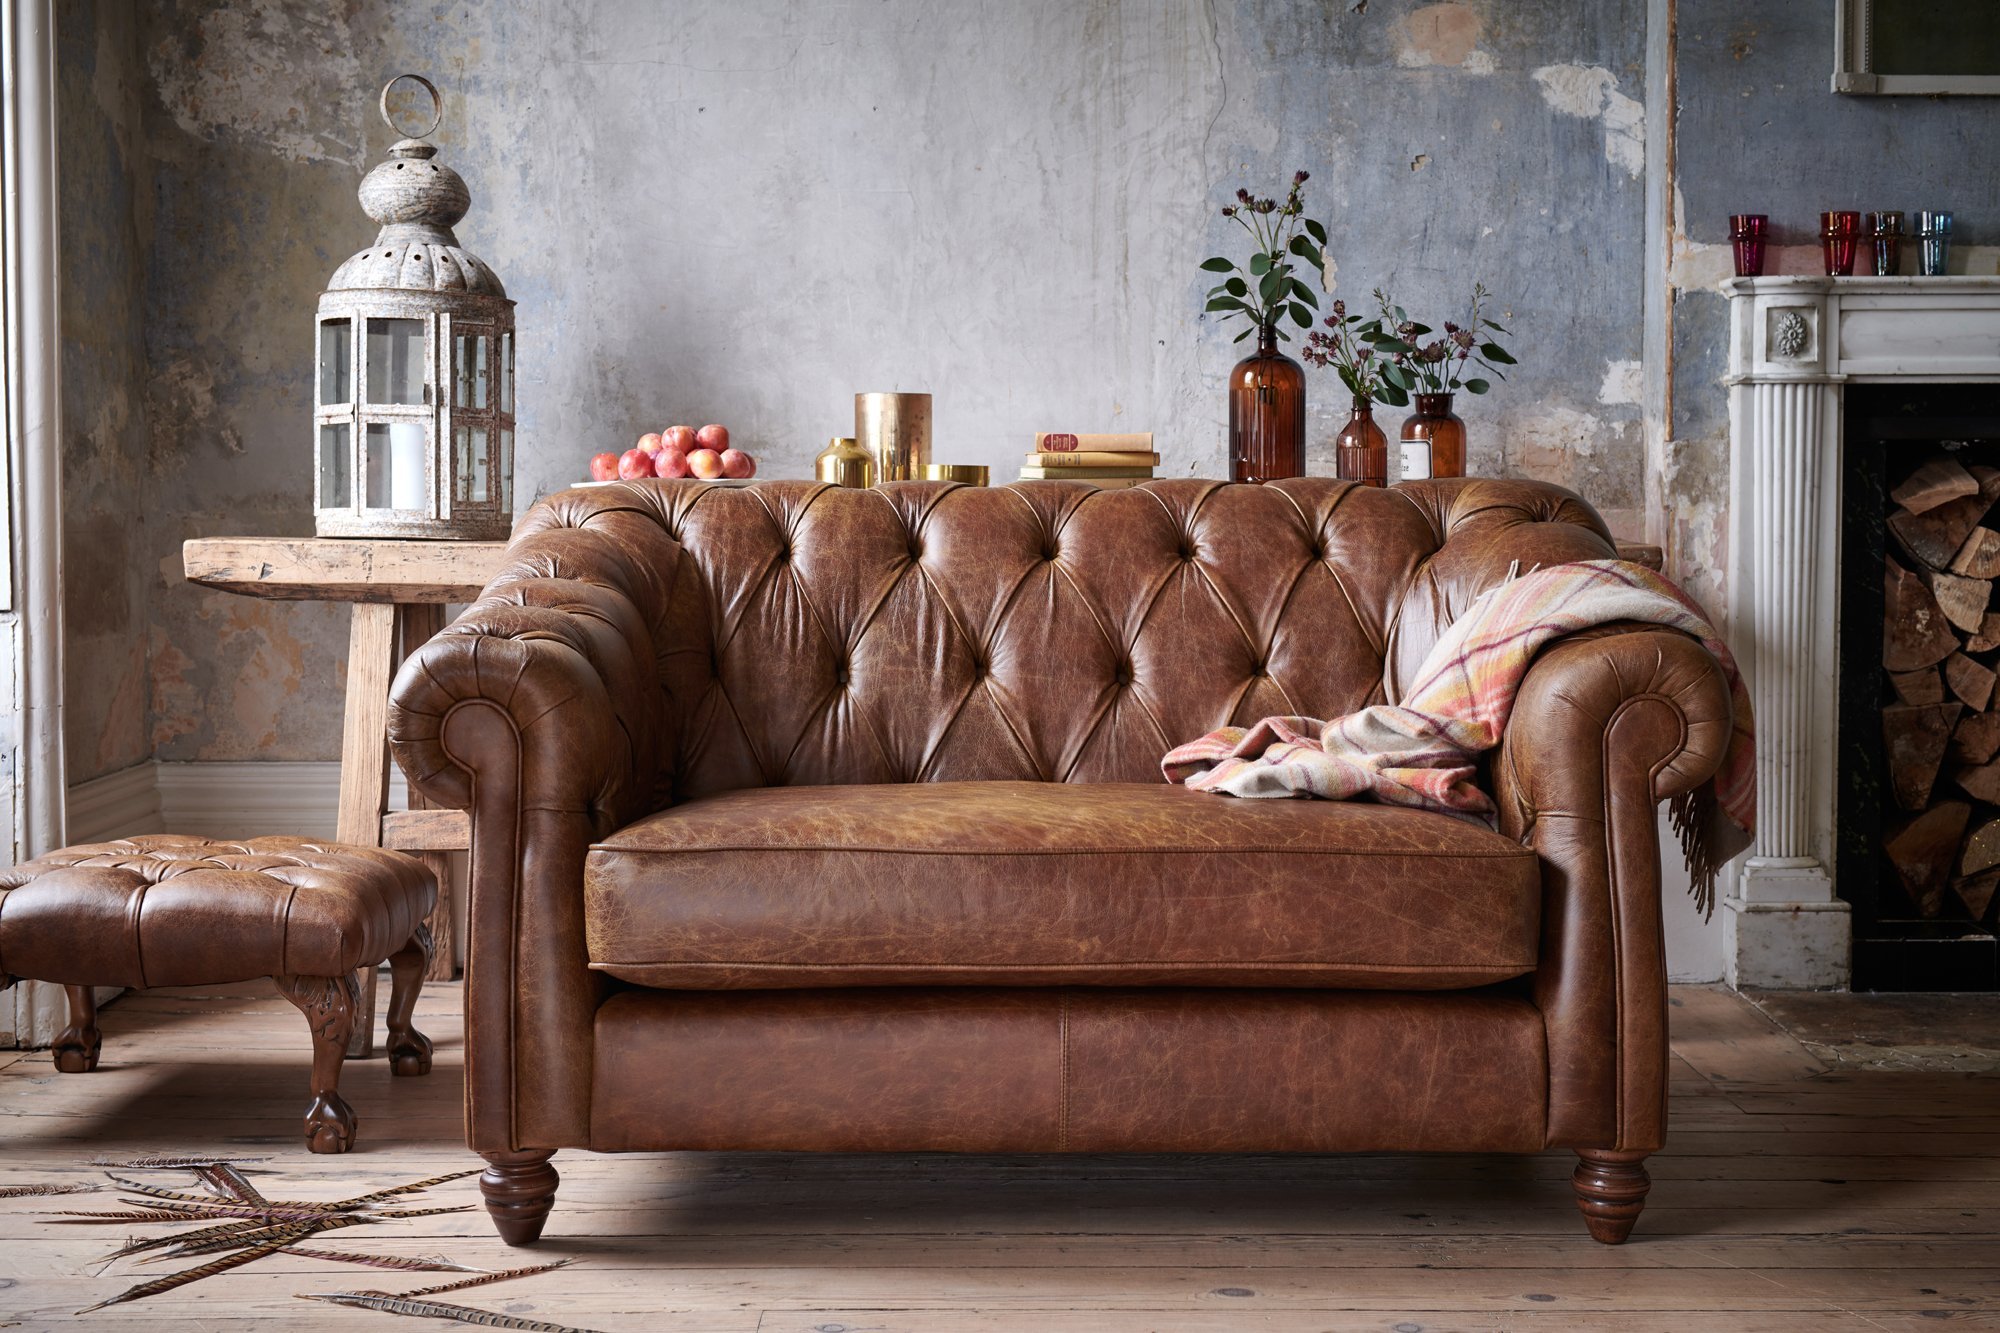 Tips To Keep Your Leather Sofa Looking, How To Make Leather Sofa Shine